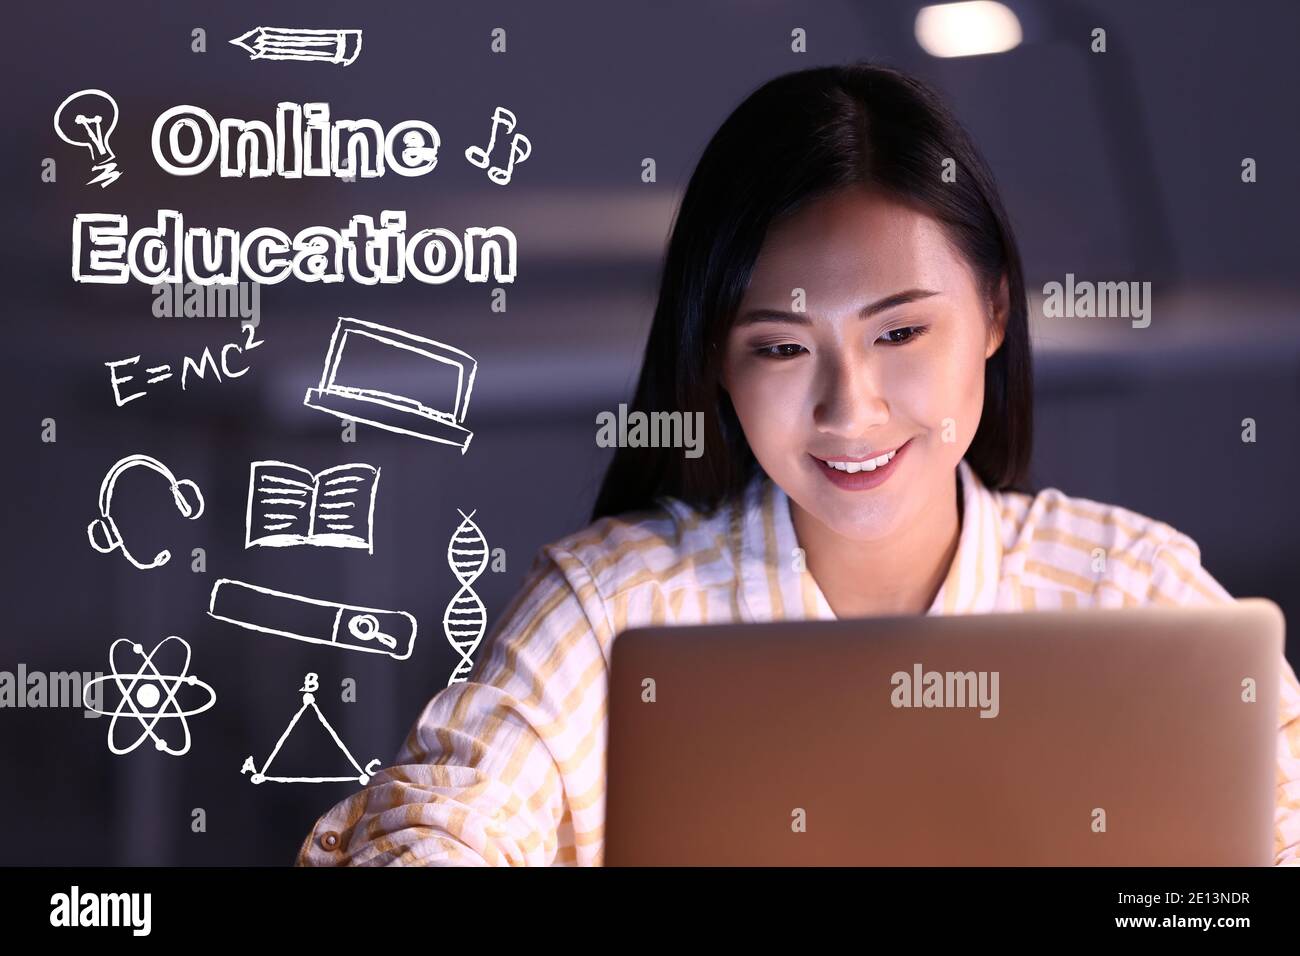 Text 'Online education' and young Asian student with laptop learning at home Stock Photo